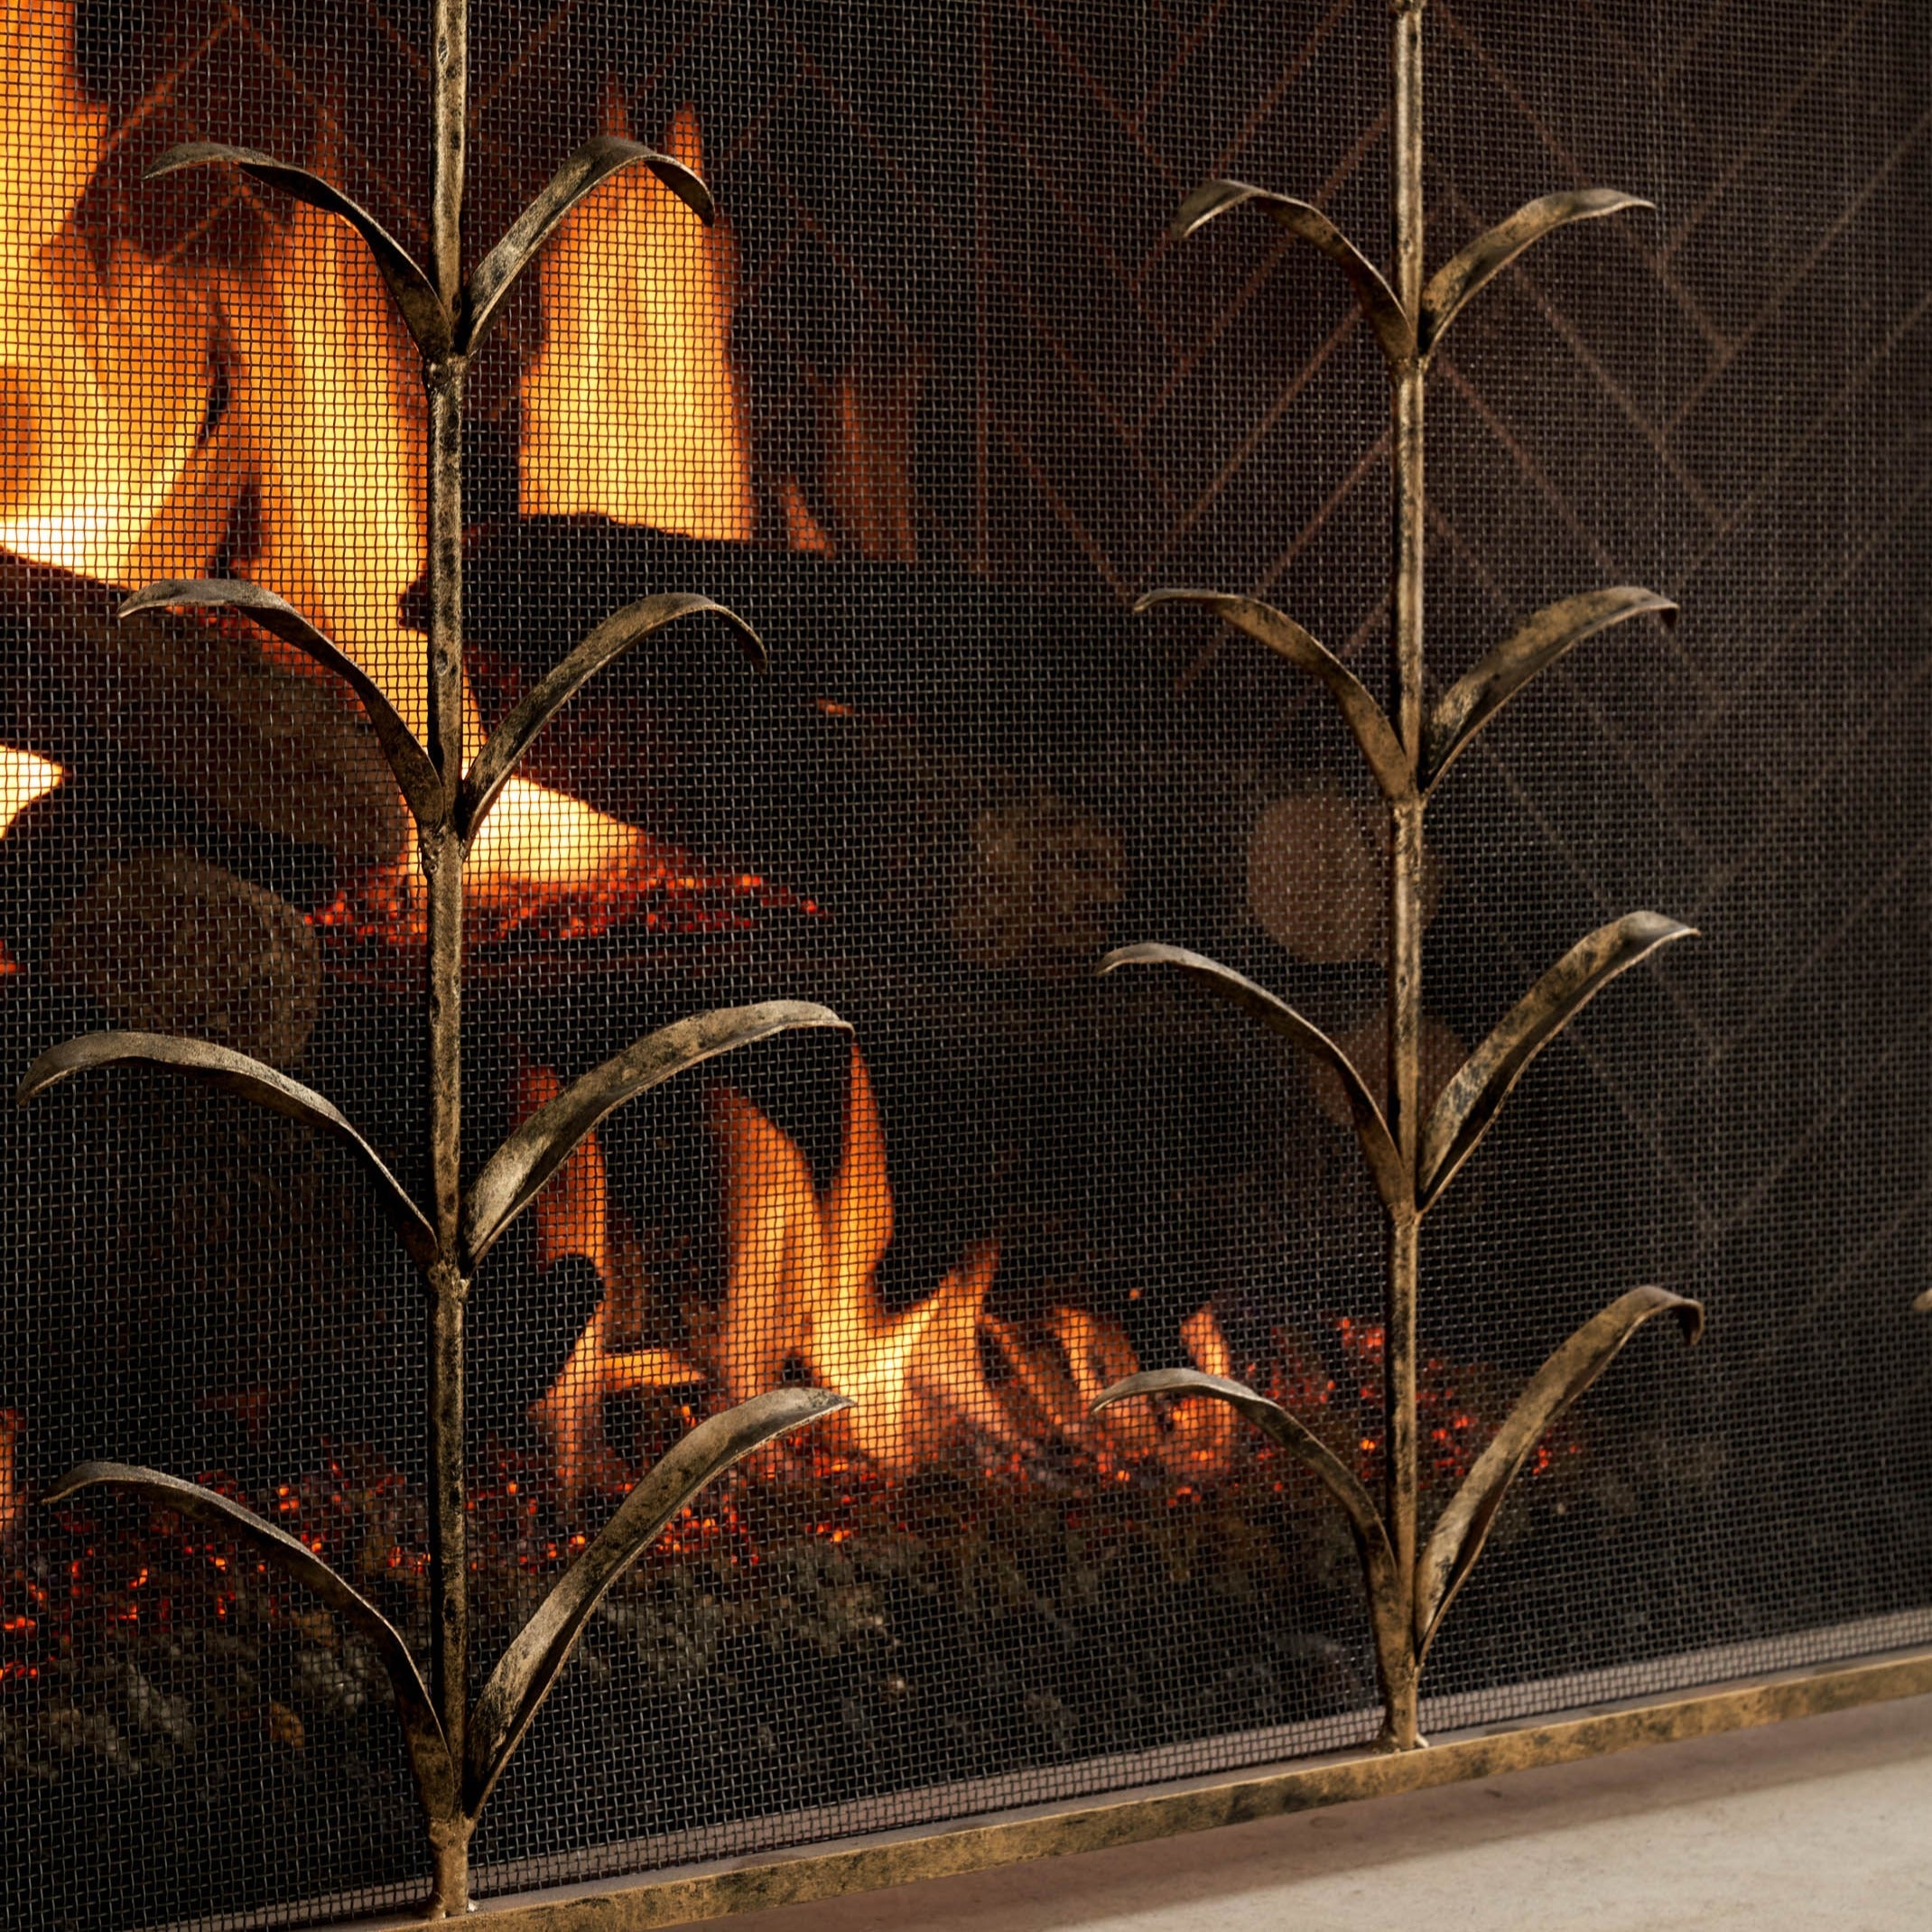 Lily Stems Fireplace Screen in Tobacco